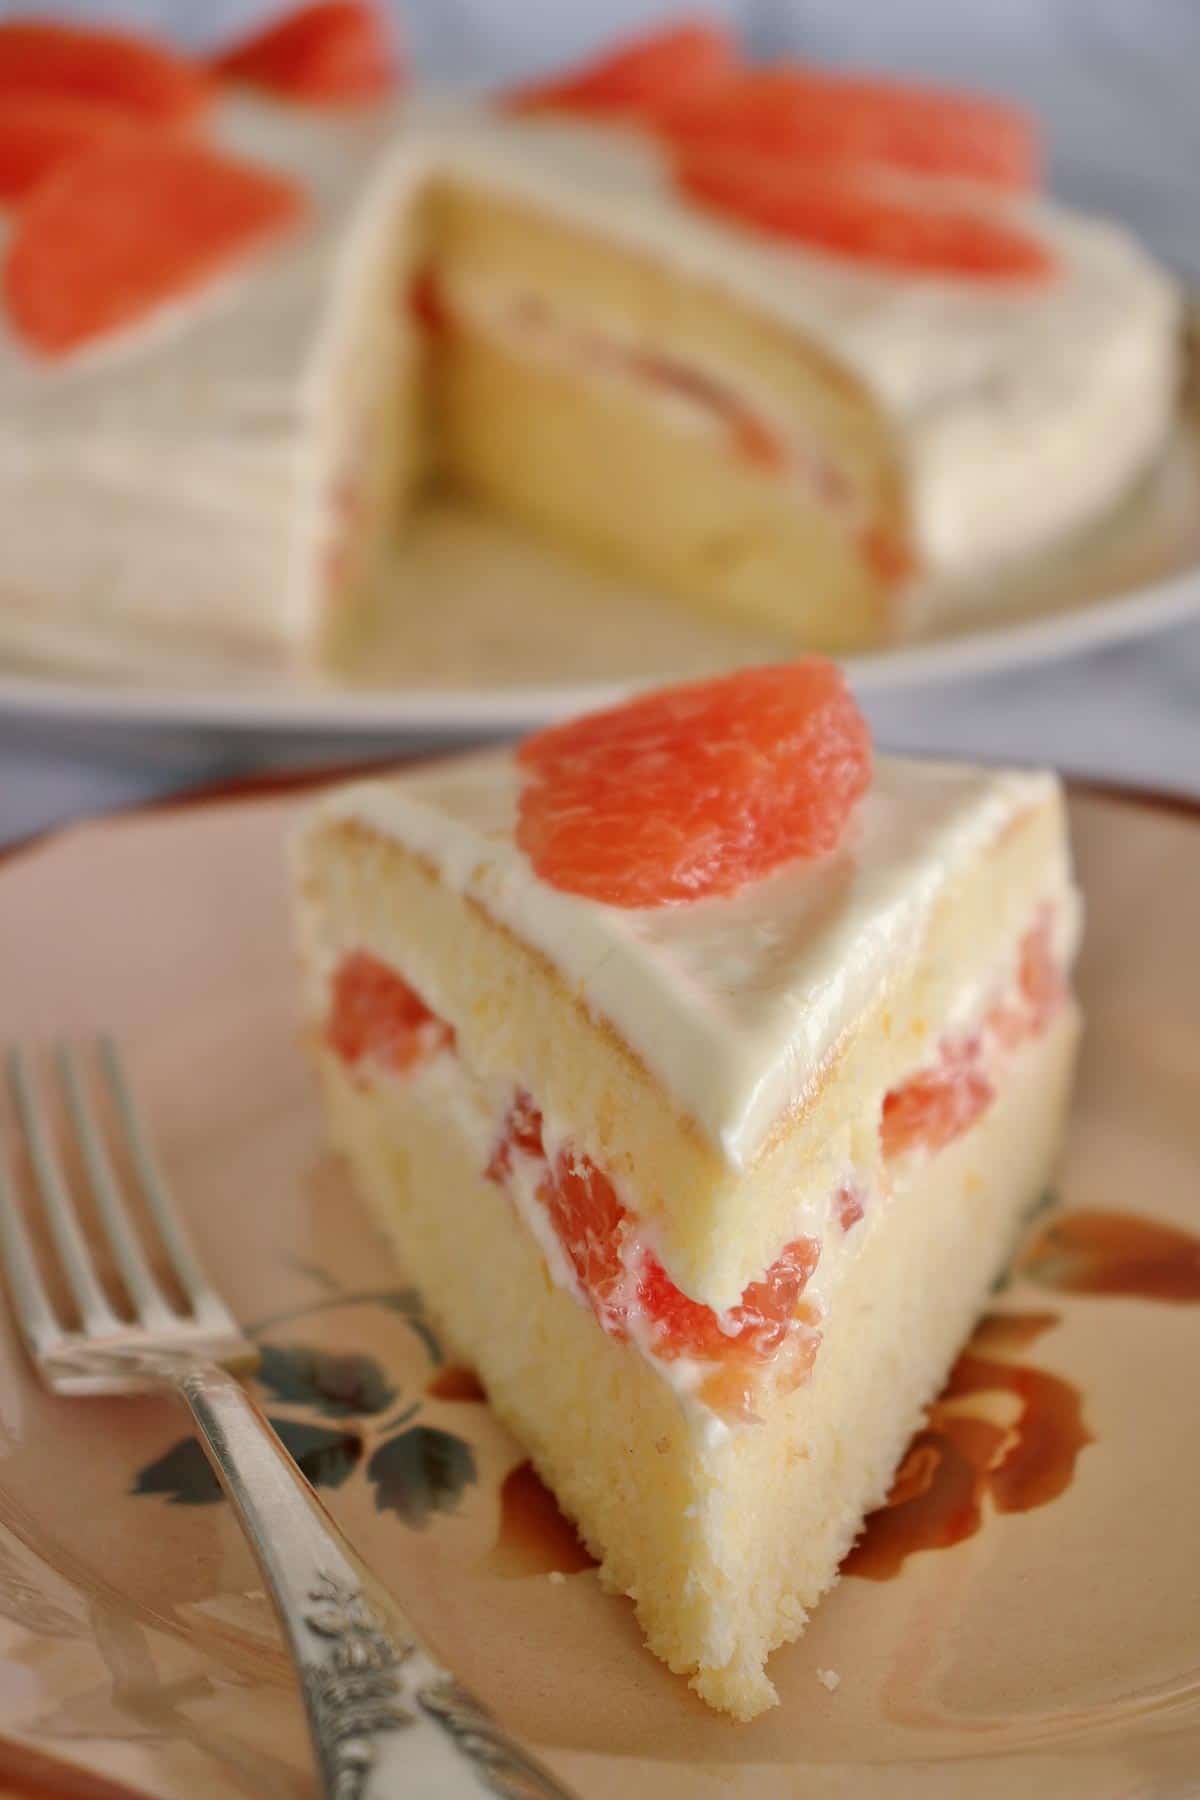 A slice of grapefruit cake on an antique plate with the full cake in the background.